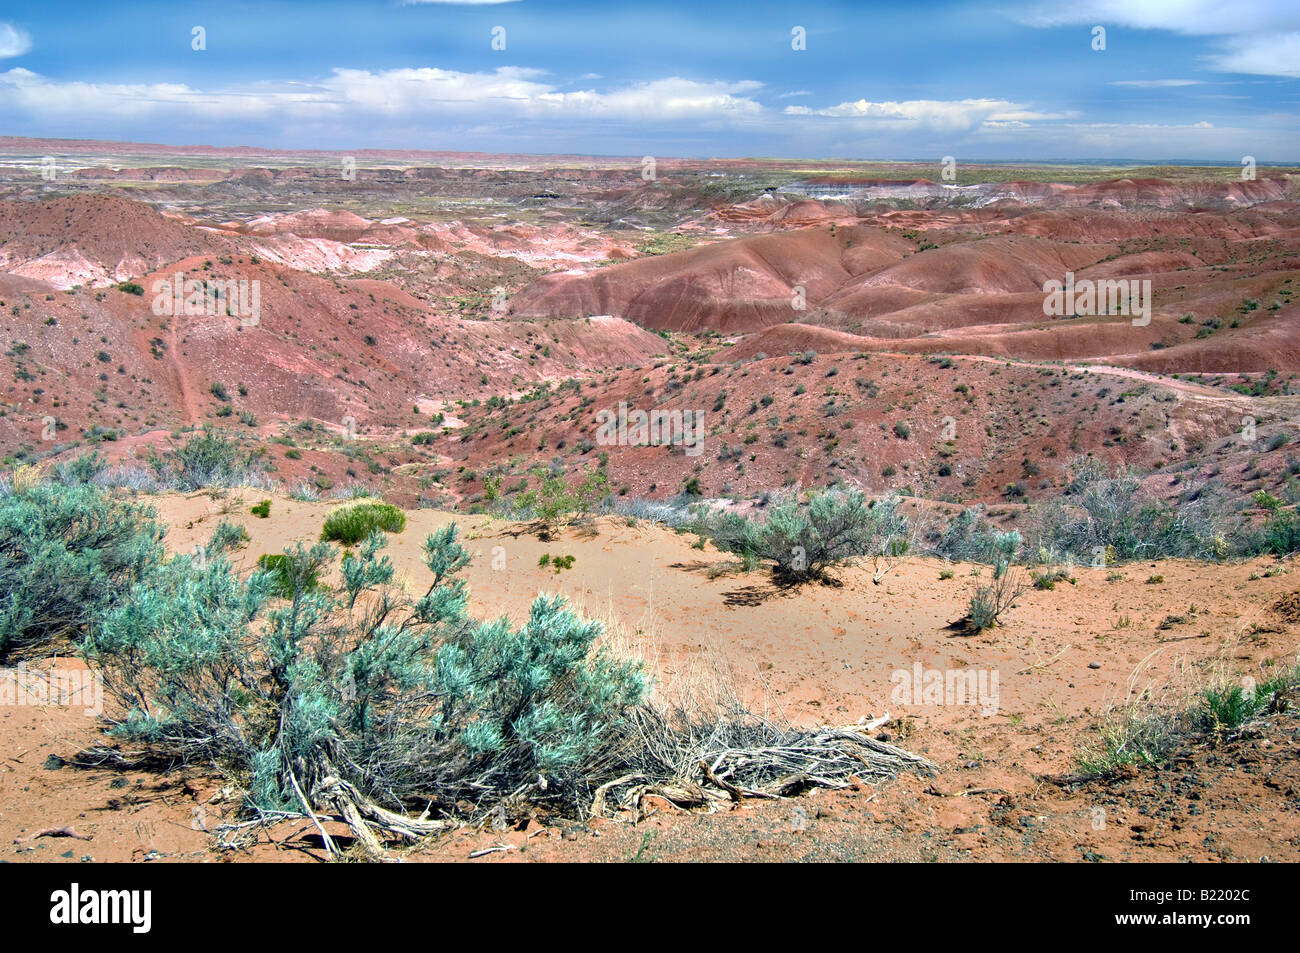 Vegetation in the Painted Desert area of the Petrified National Park in Arizona Stock Photo